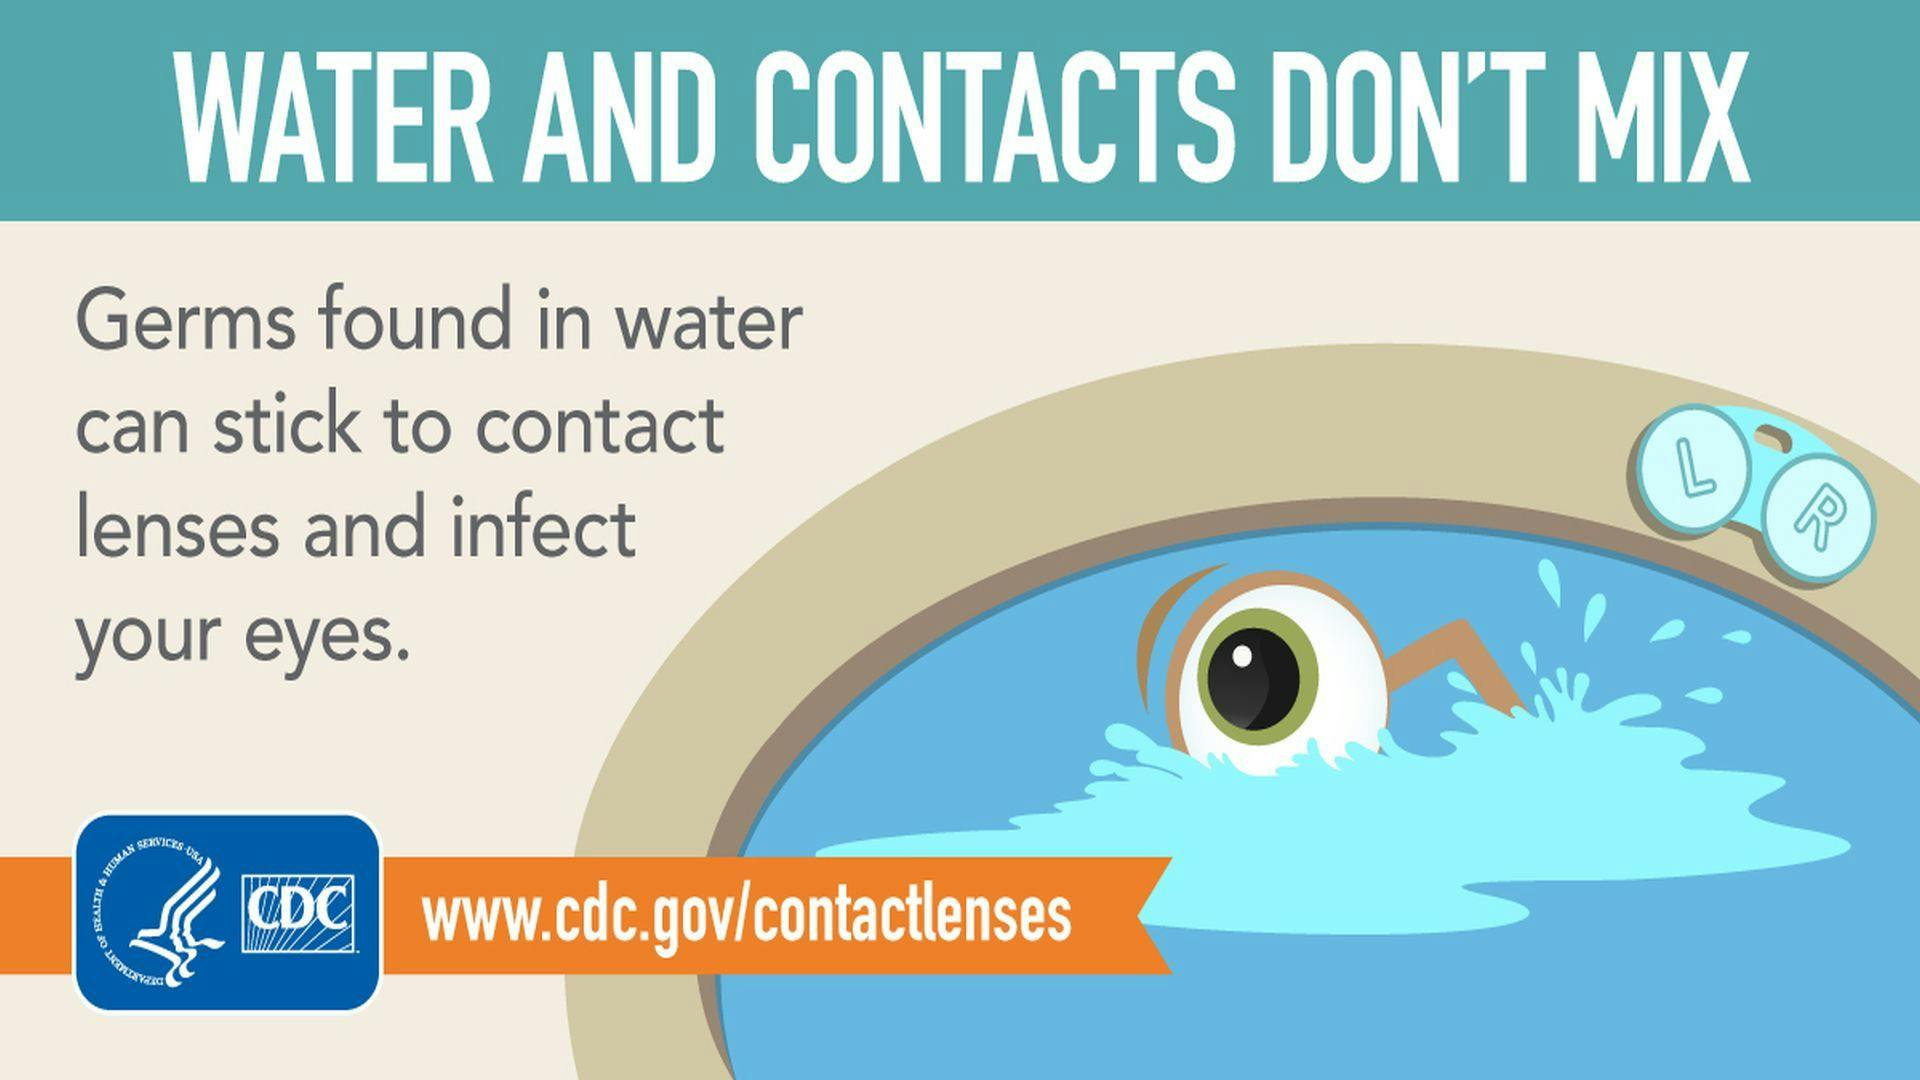 Most Adolescent Contact Lens Wearers Report Habits That Could Cause Eye Infection